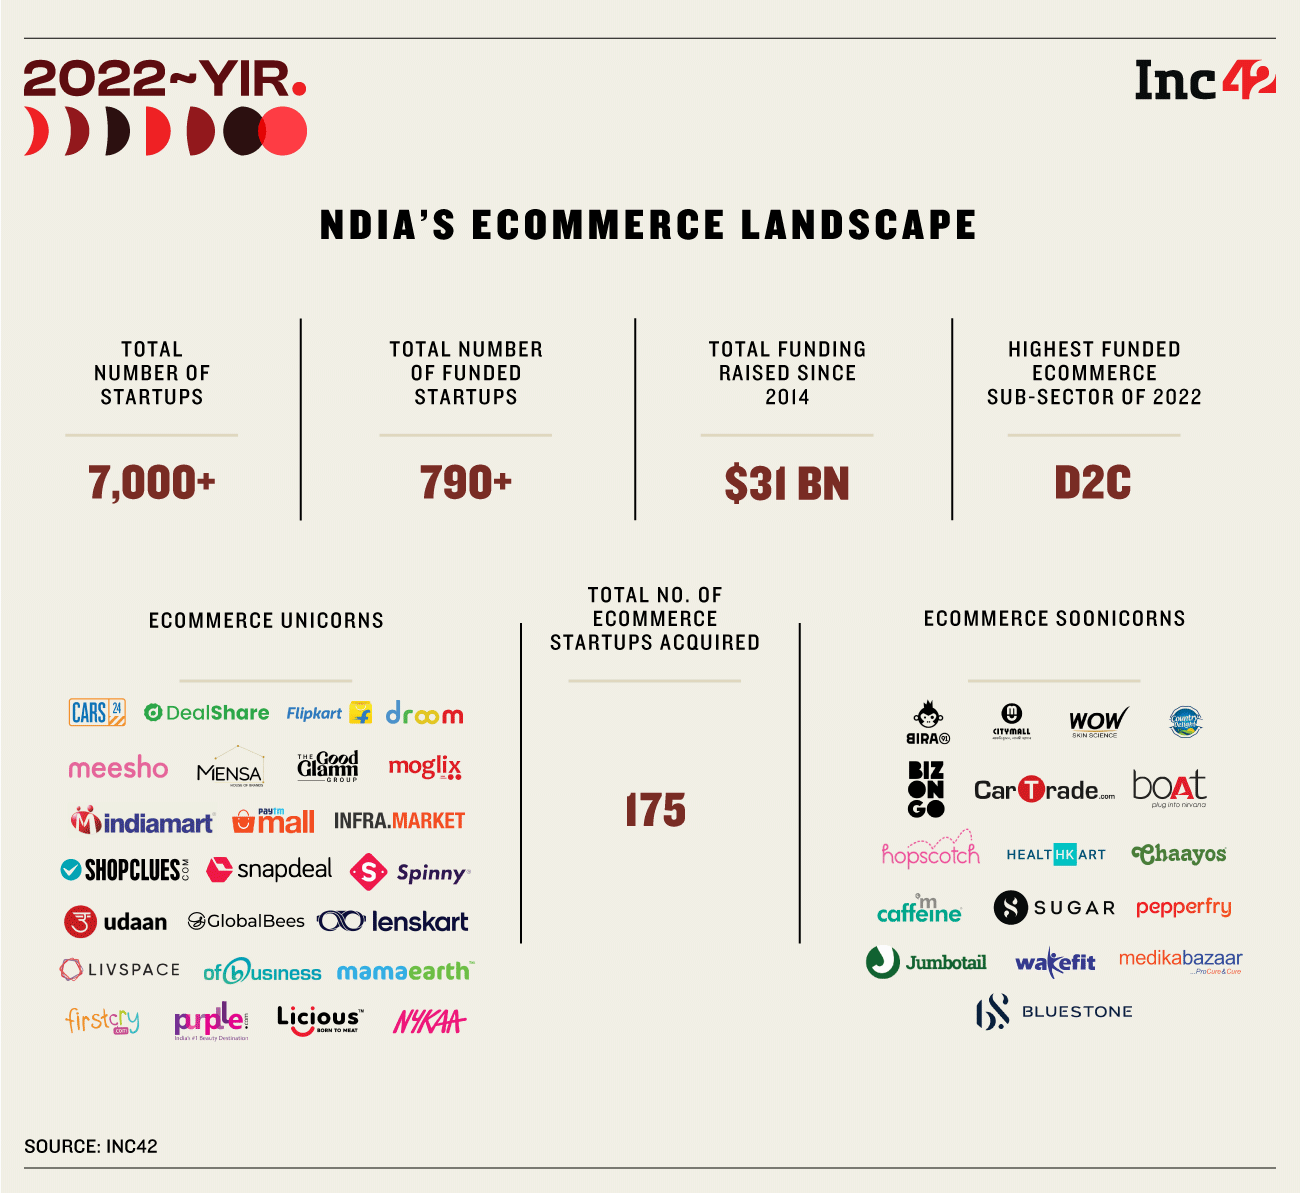 Ecommerce landscape in India